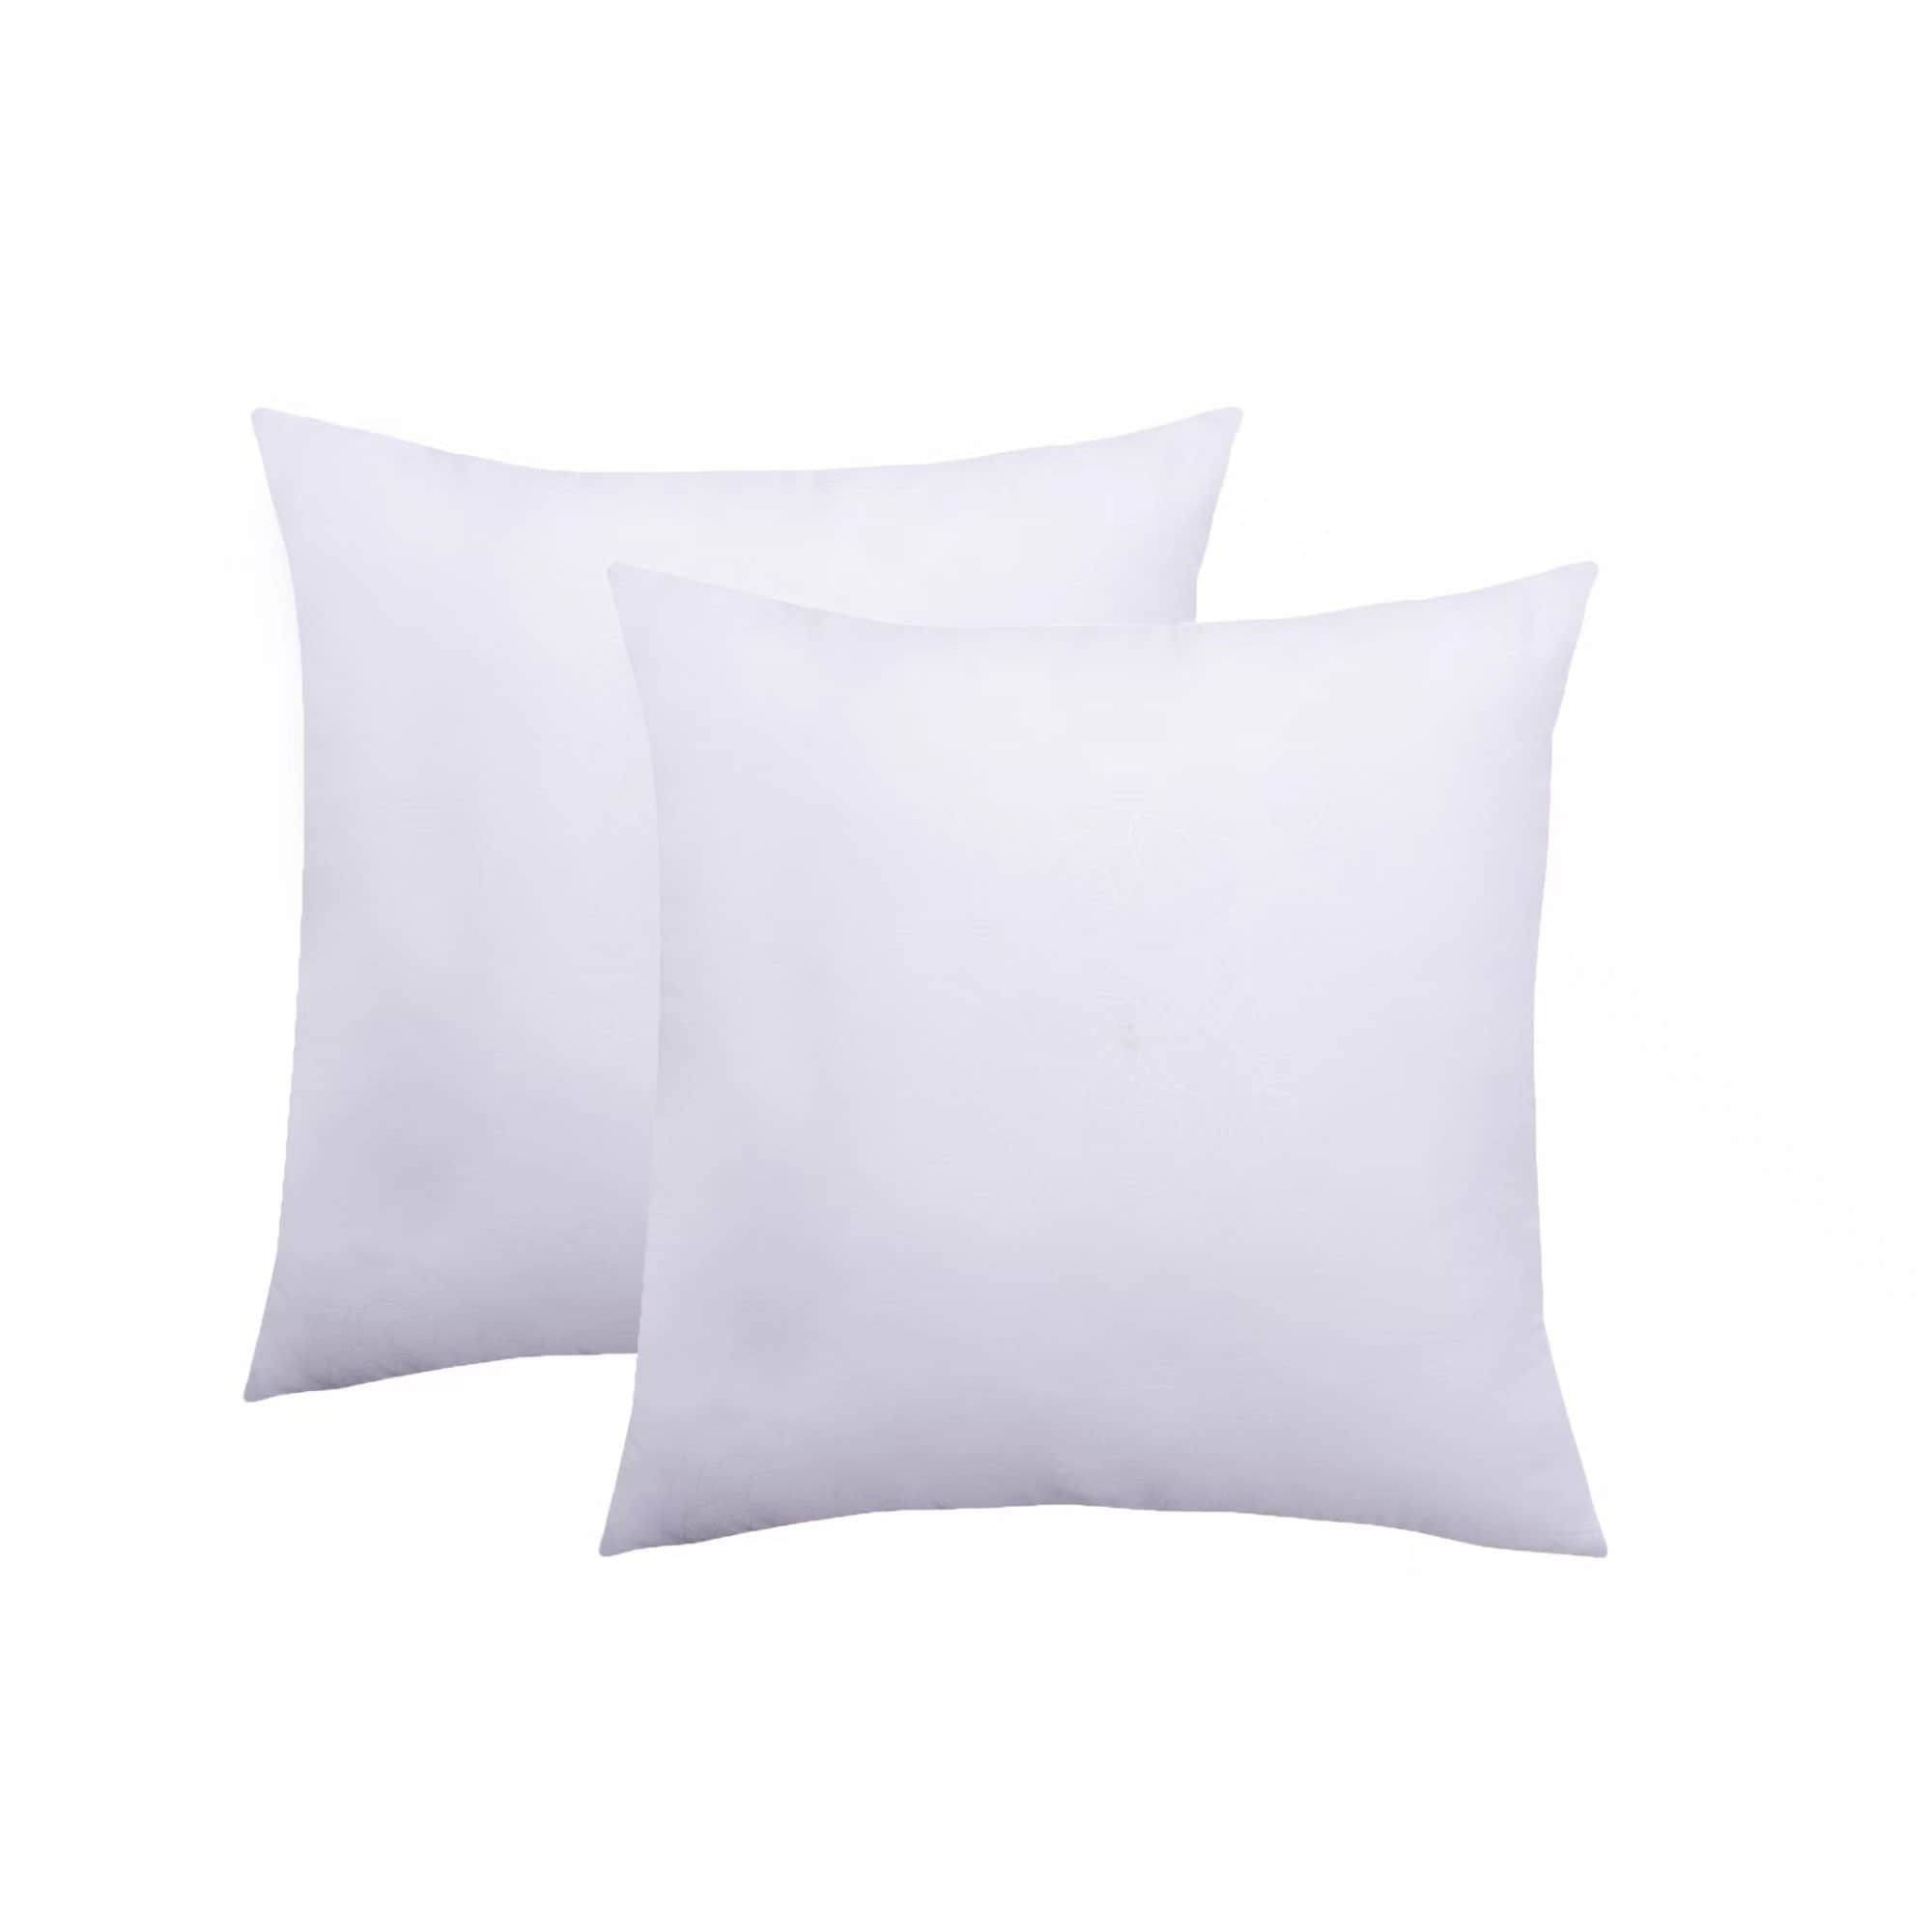 https://ak1.ostkcdn.com/images/products/is/images/direct/d2d0ef1b848540731c1ade7143e9ac67f74e58fa/Glow%27s-Avenue-Square-Polyester-Throw-Pillow-Insert---Set-of-2.jpg